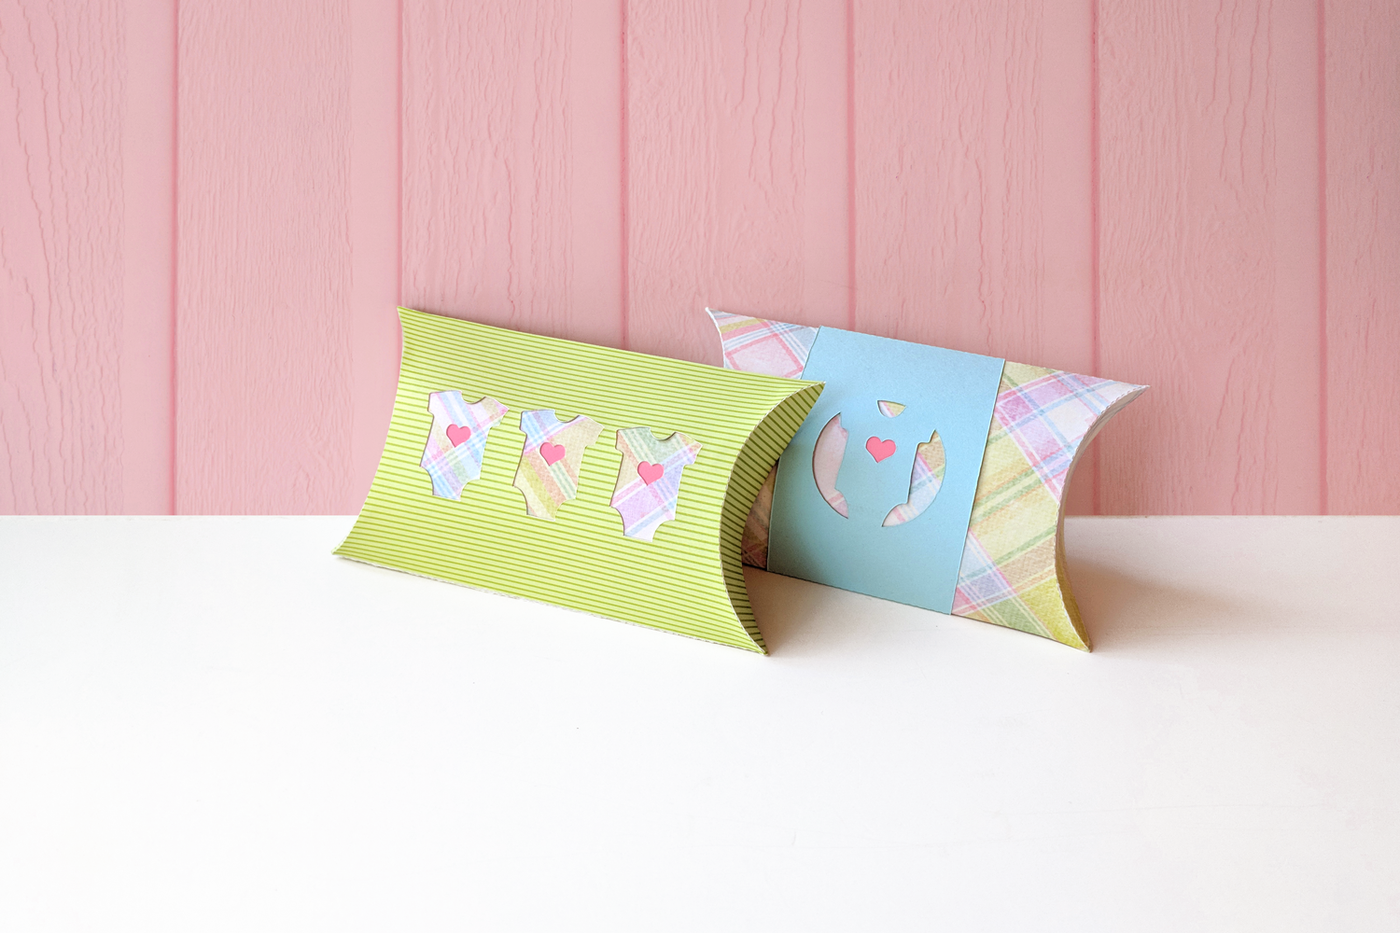 Two pillow boxes on a white surface with a pink paneled wall behind. The left box is green with cutouts of 3 pastel plaid baby onesies with pink hearts. The right box is pastel plaid with a blue bland that has the cutout of a baby onesie with a pink heart.